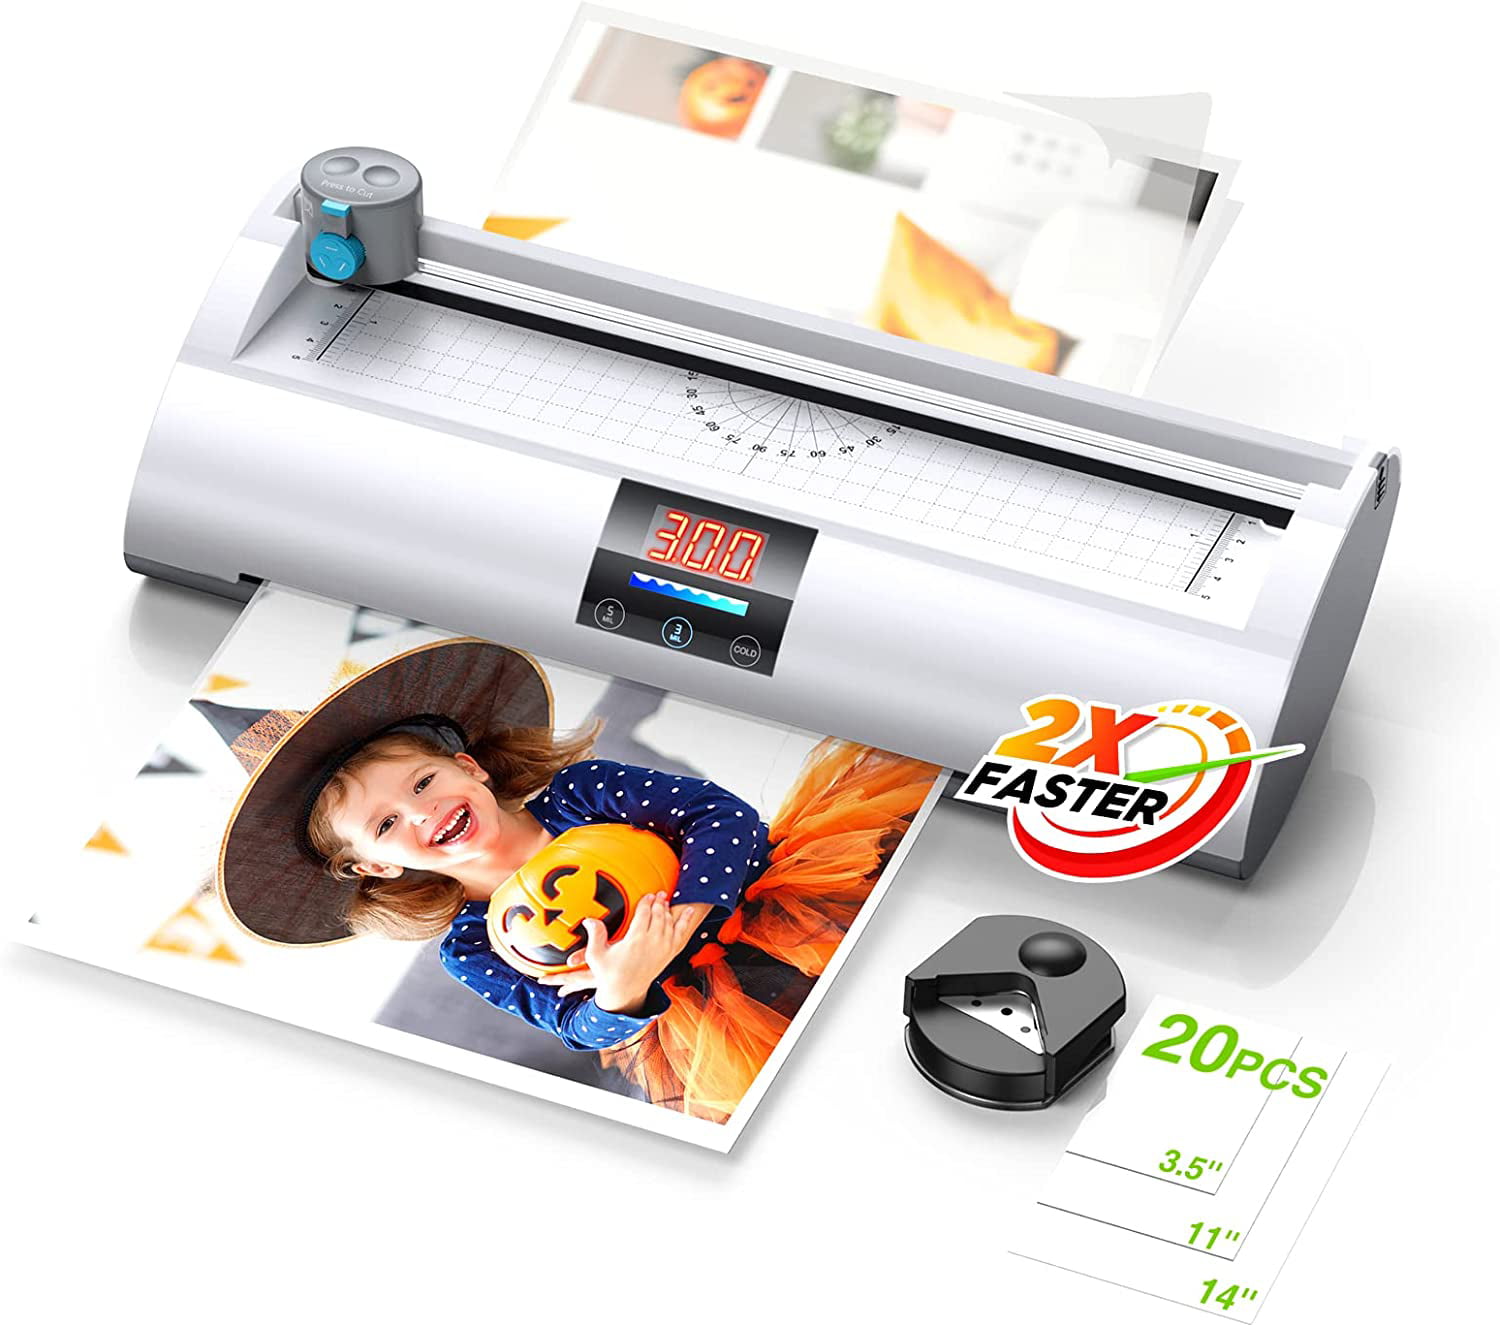 90s Fast Warm-up Portable Desktop Thermal Laminator for Home/School/Office Laminator A4 GLADTOP 9 Inches Personal Laminator Machine with 5pcs Laminator Sheets Pouches 